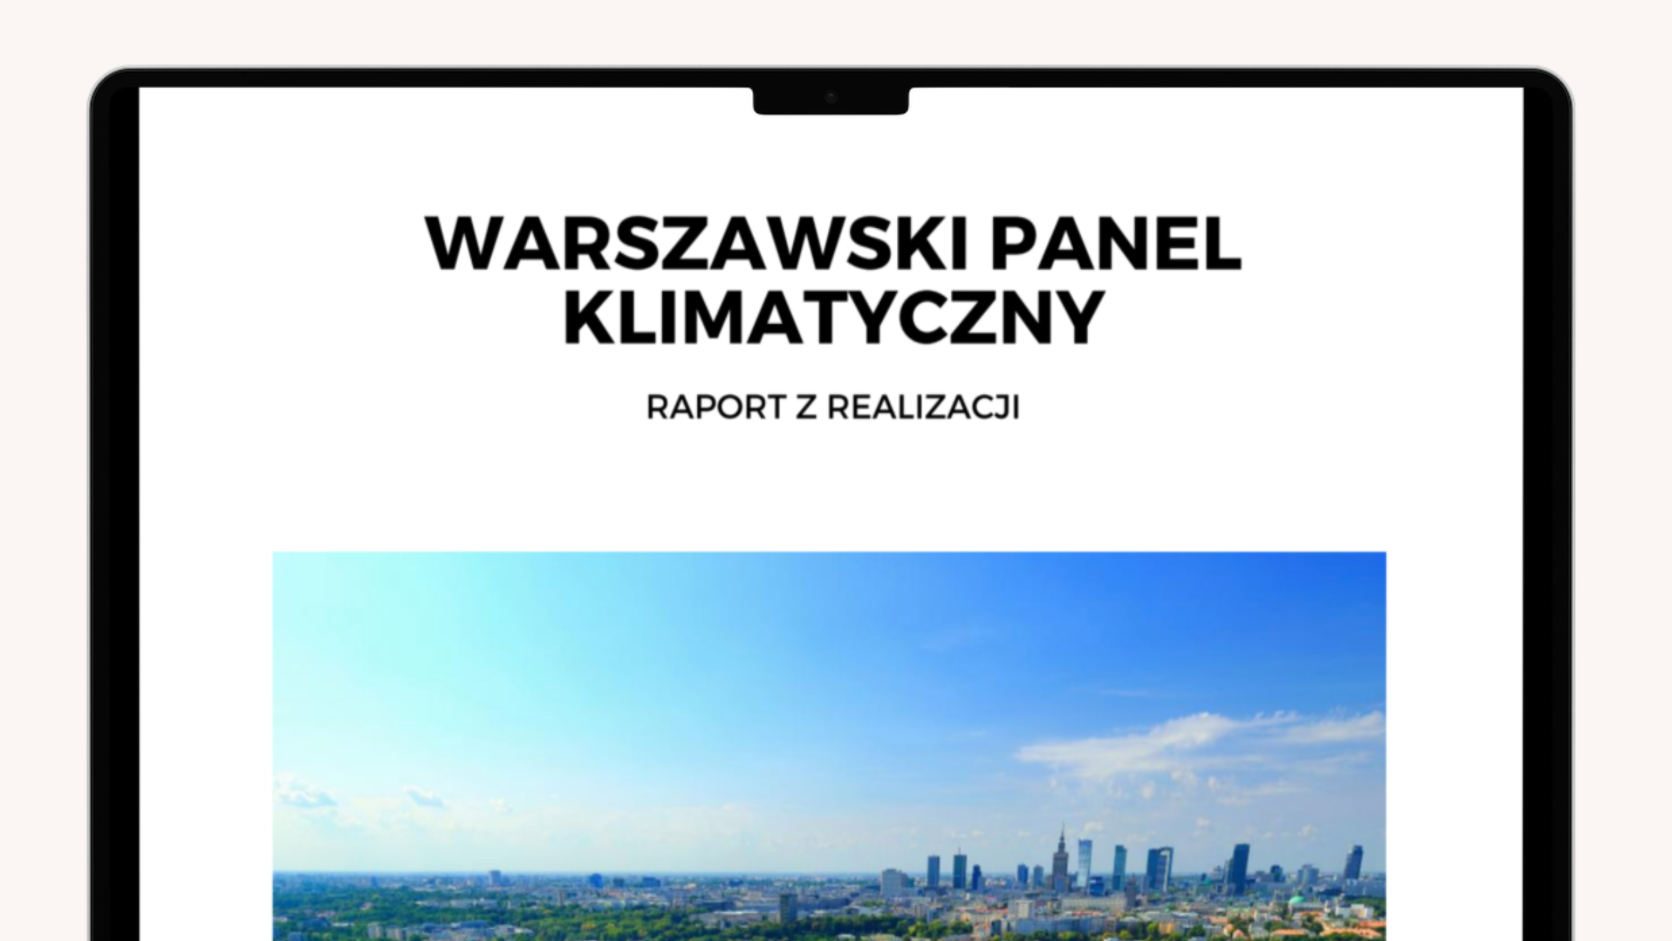 Mockup of the landing page for Poland's climate assembly